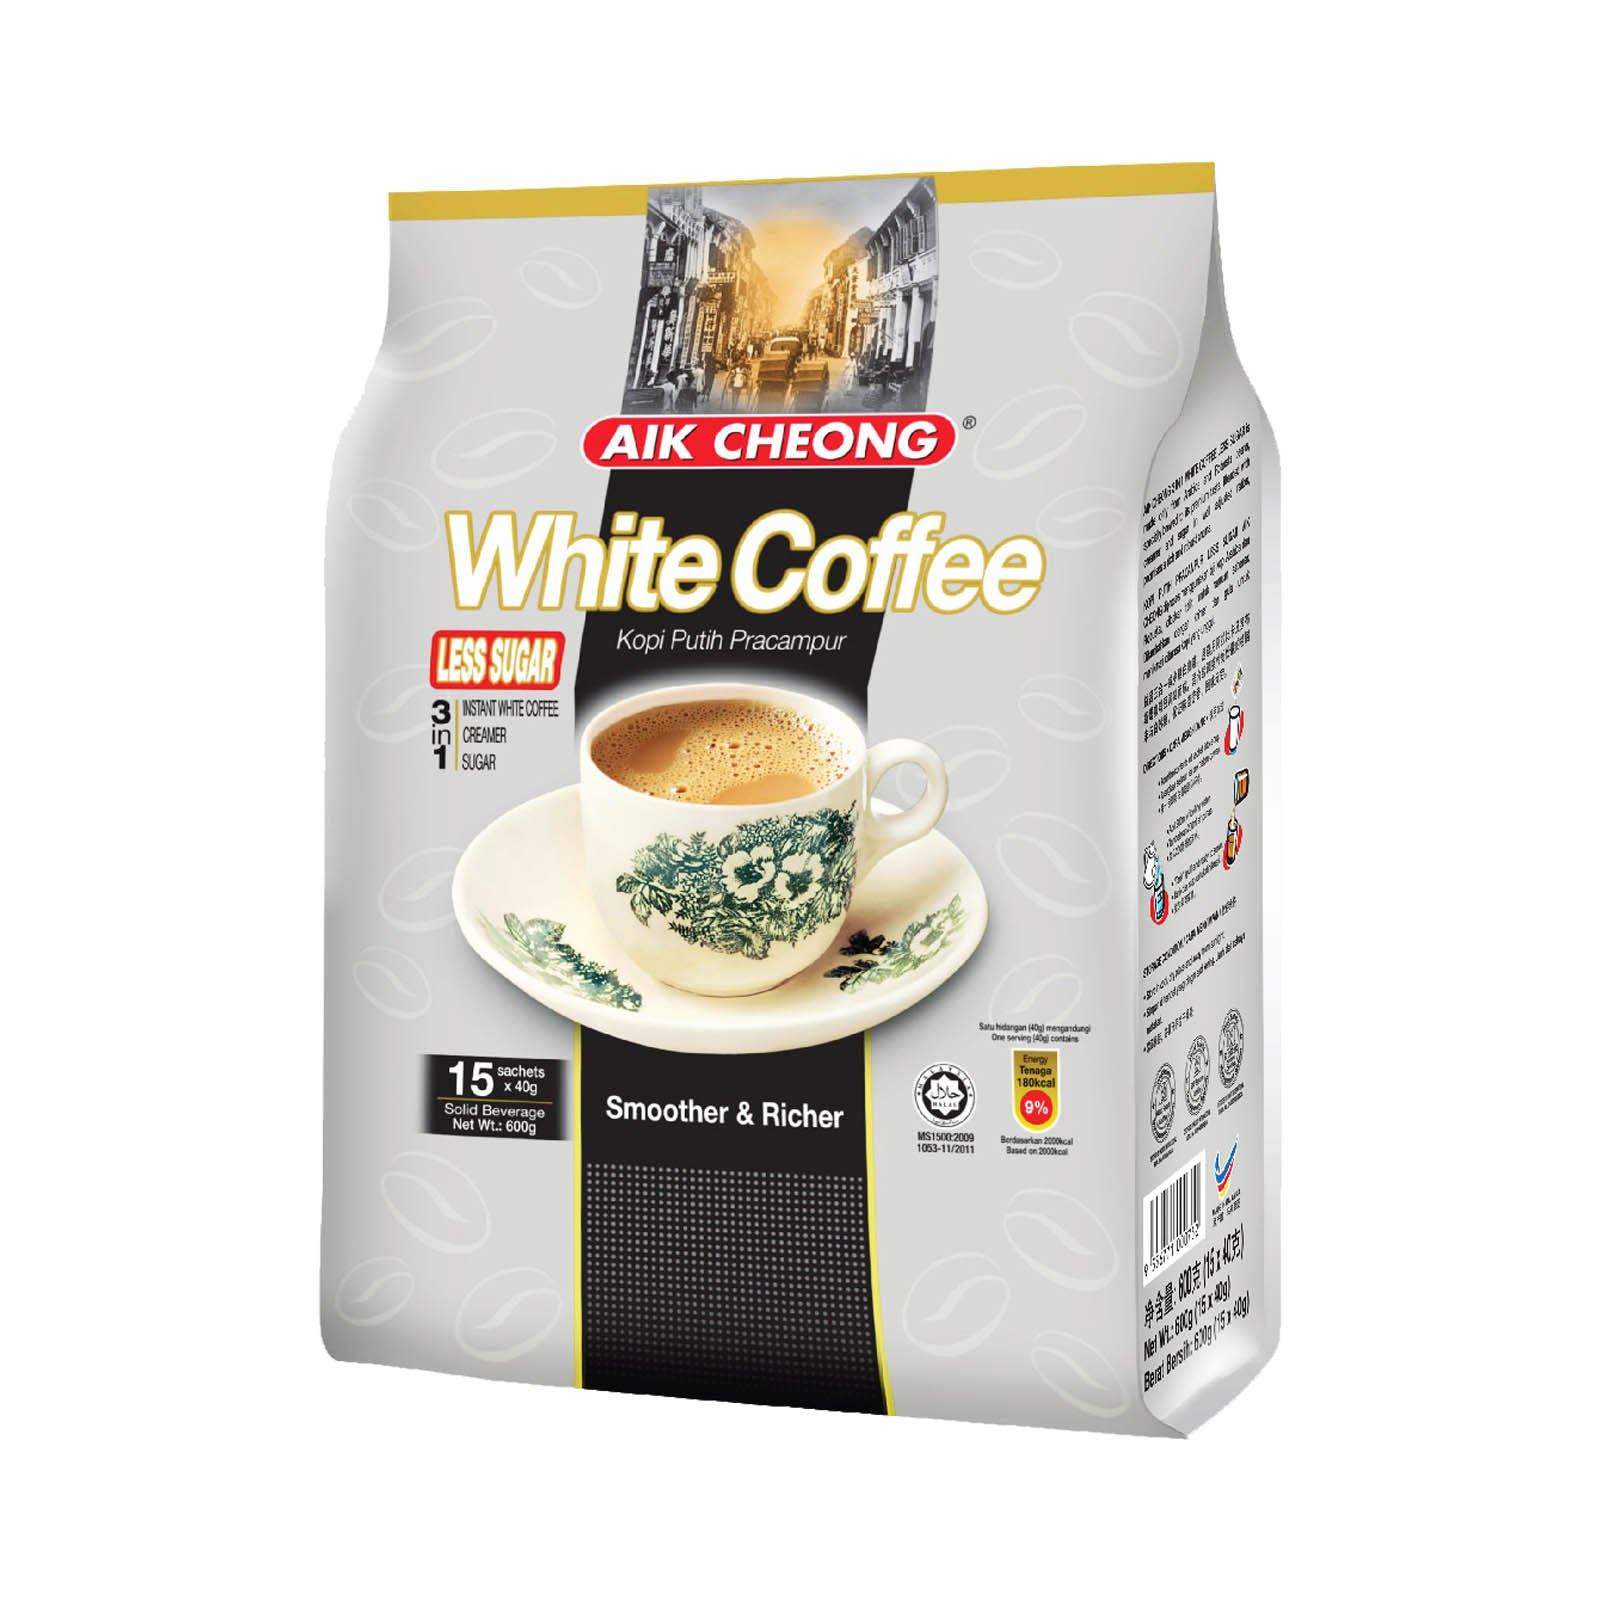 AIK CHEONG WHITE COFFEE INSTANT 3 IN 1 (LESS SUGAR) 600 G - Premium Co  Groceries 